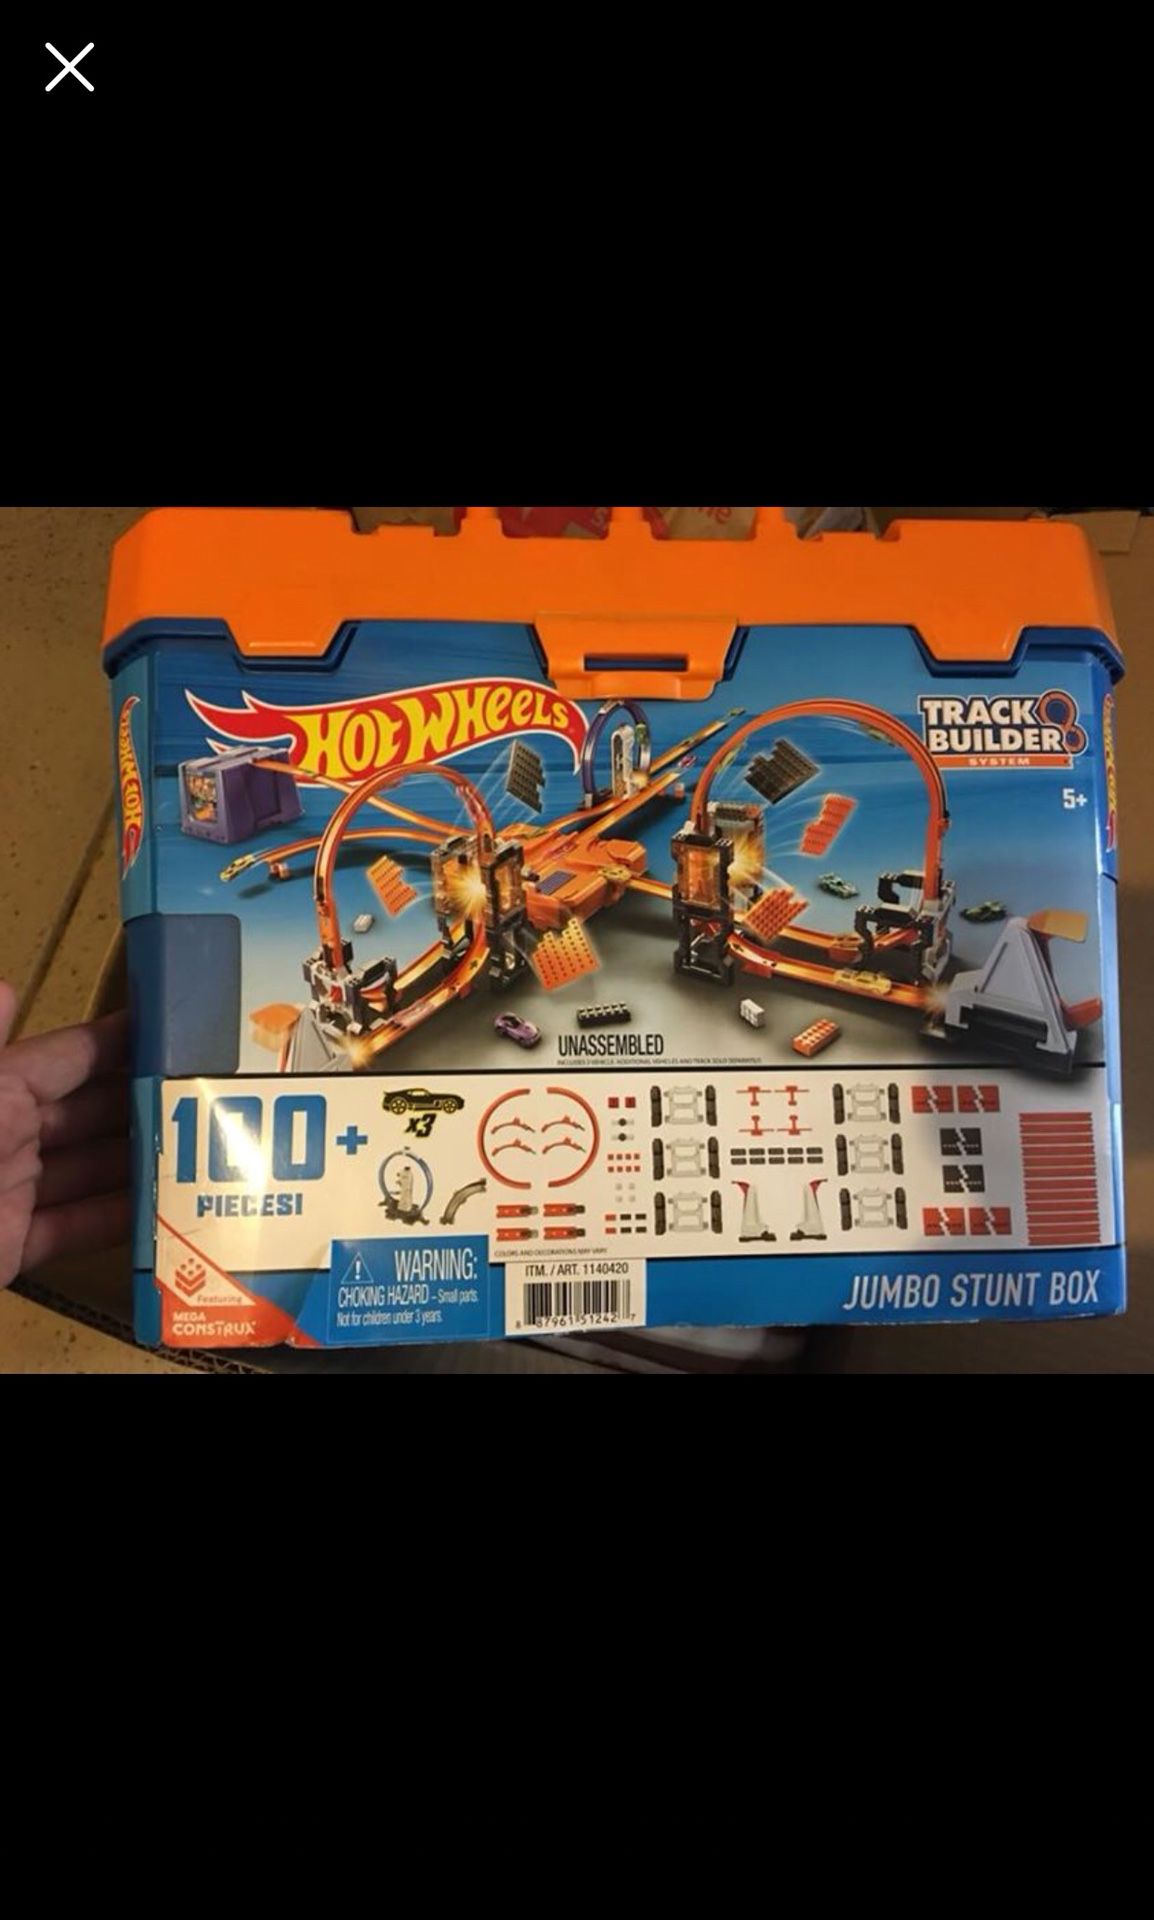 hot wheels jumbo stunt box 100 pieces track builder system with 3 cars